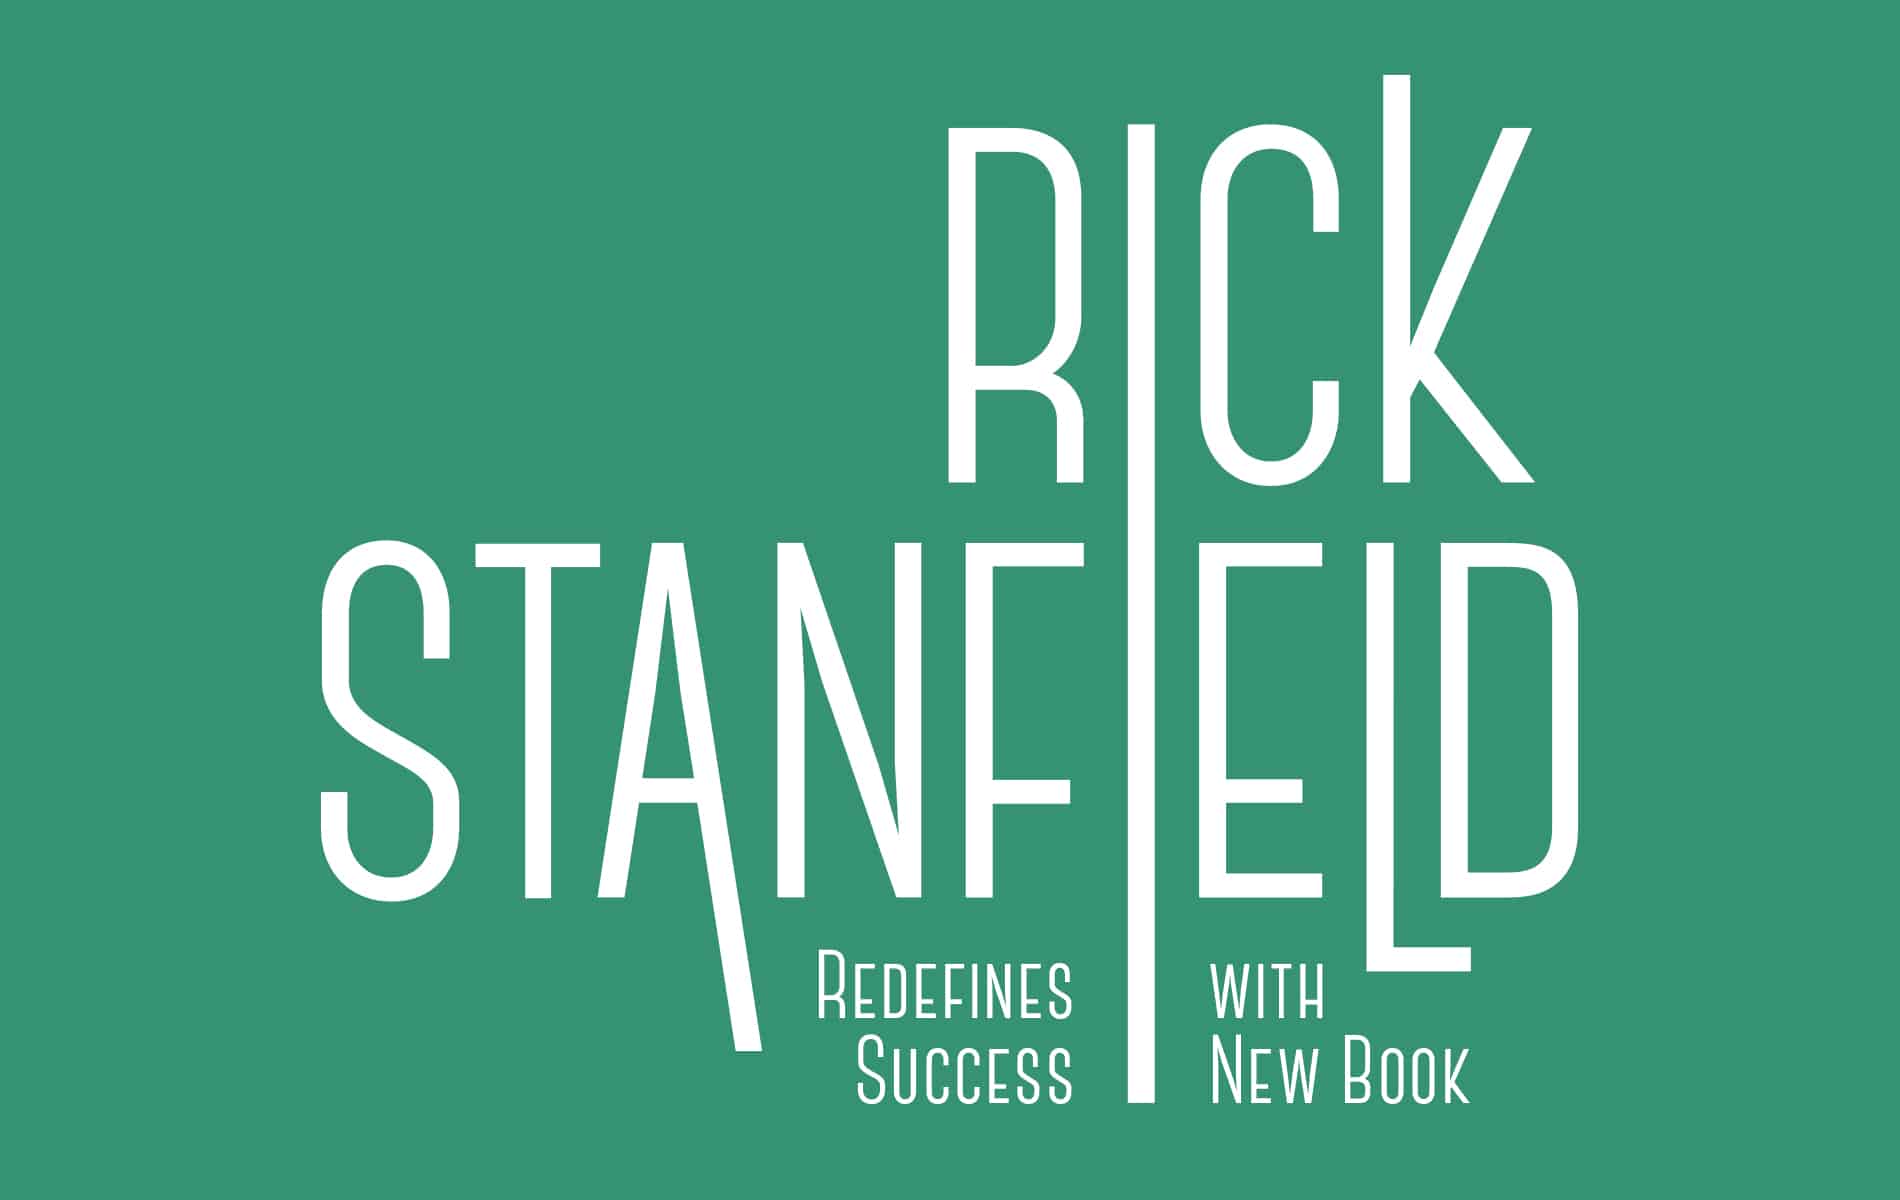 Green background with white copy says, "Rick Stanfield Redefines Success with New Book"